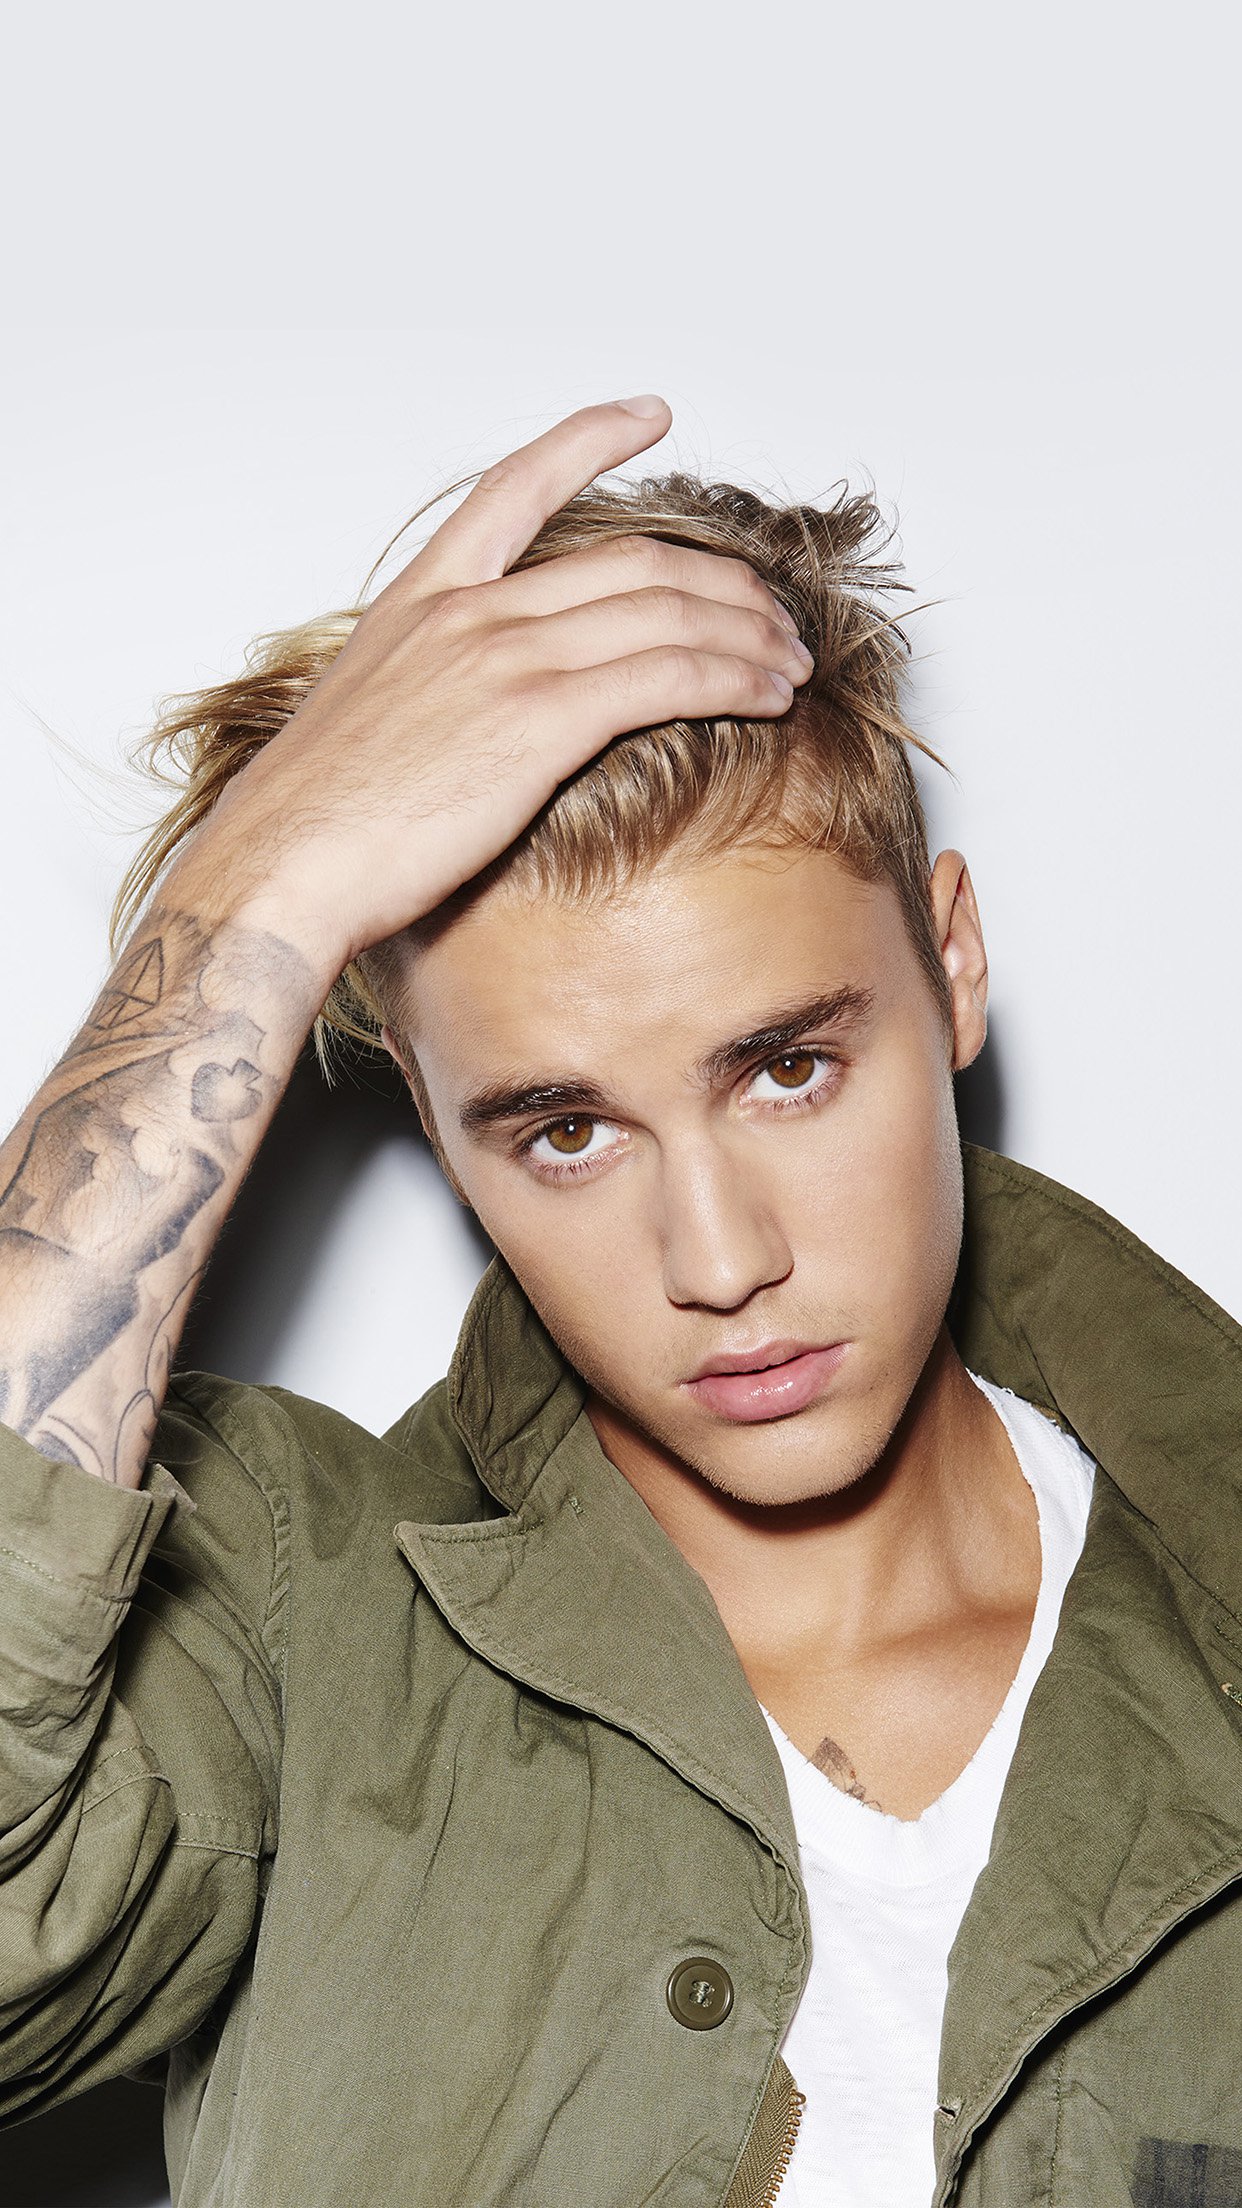 Justin Bieber Music Singer Celebrity Android wallpaper - Android HD ...